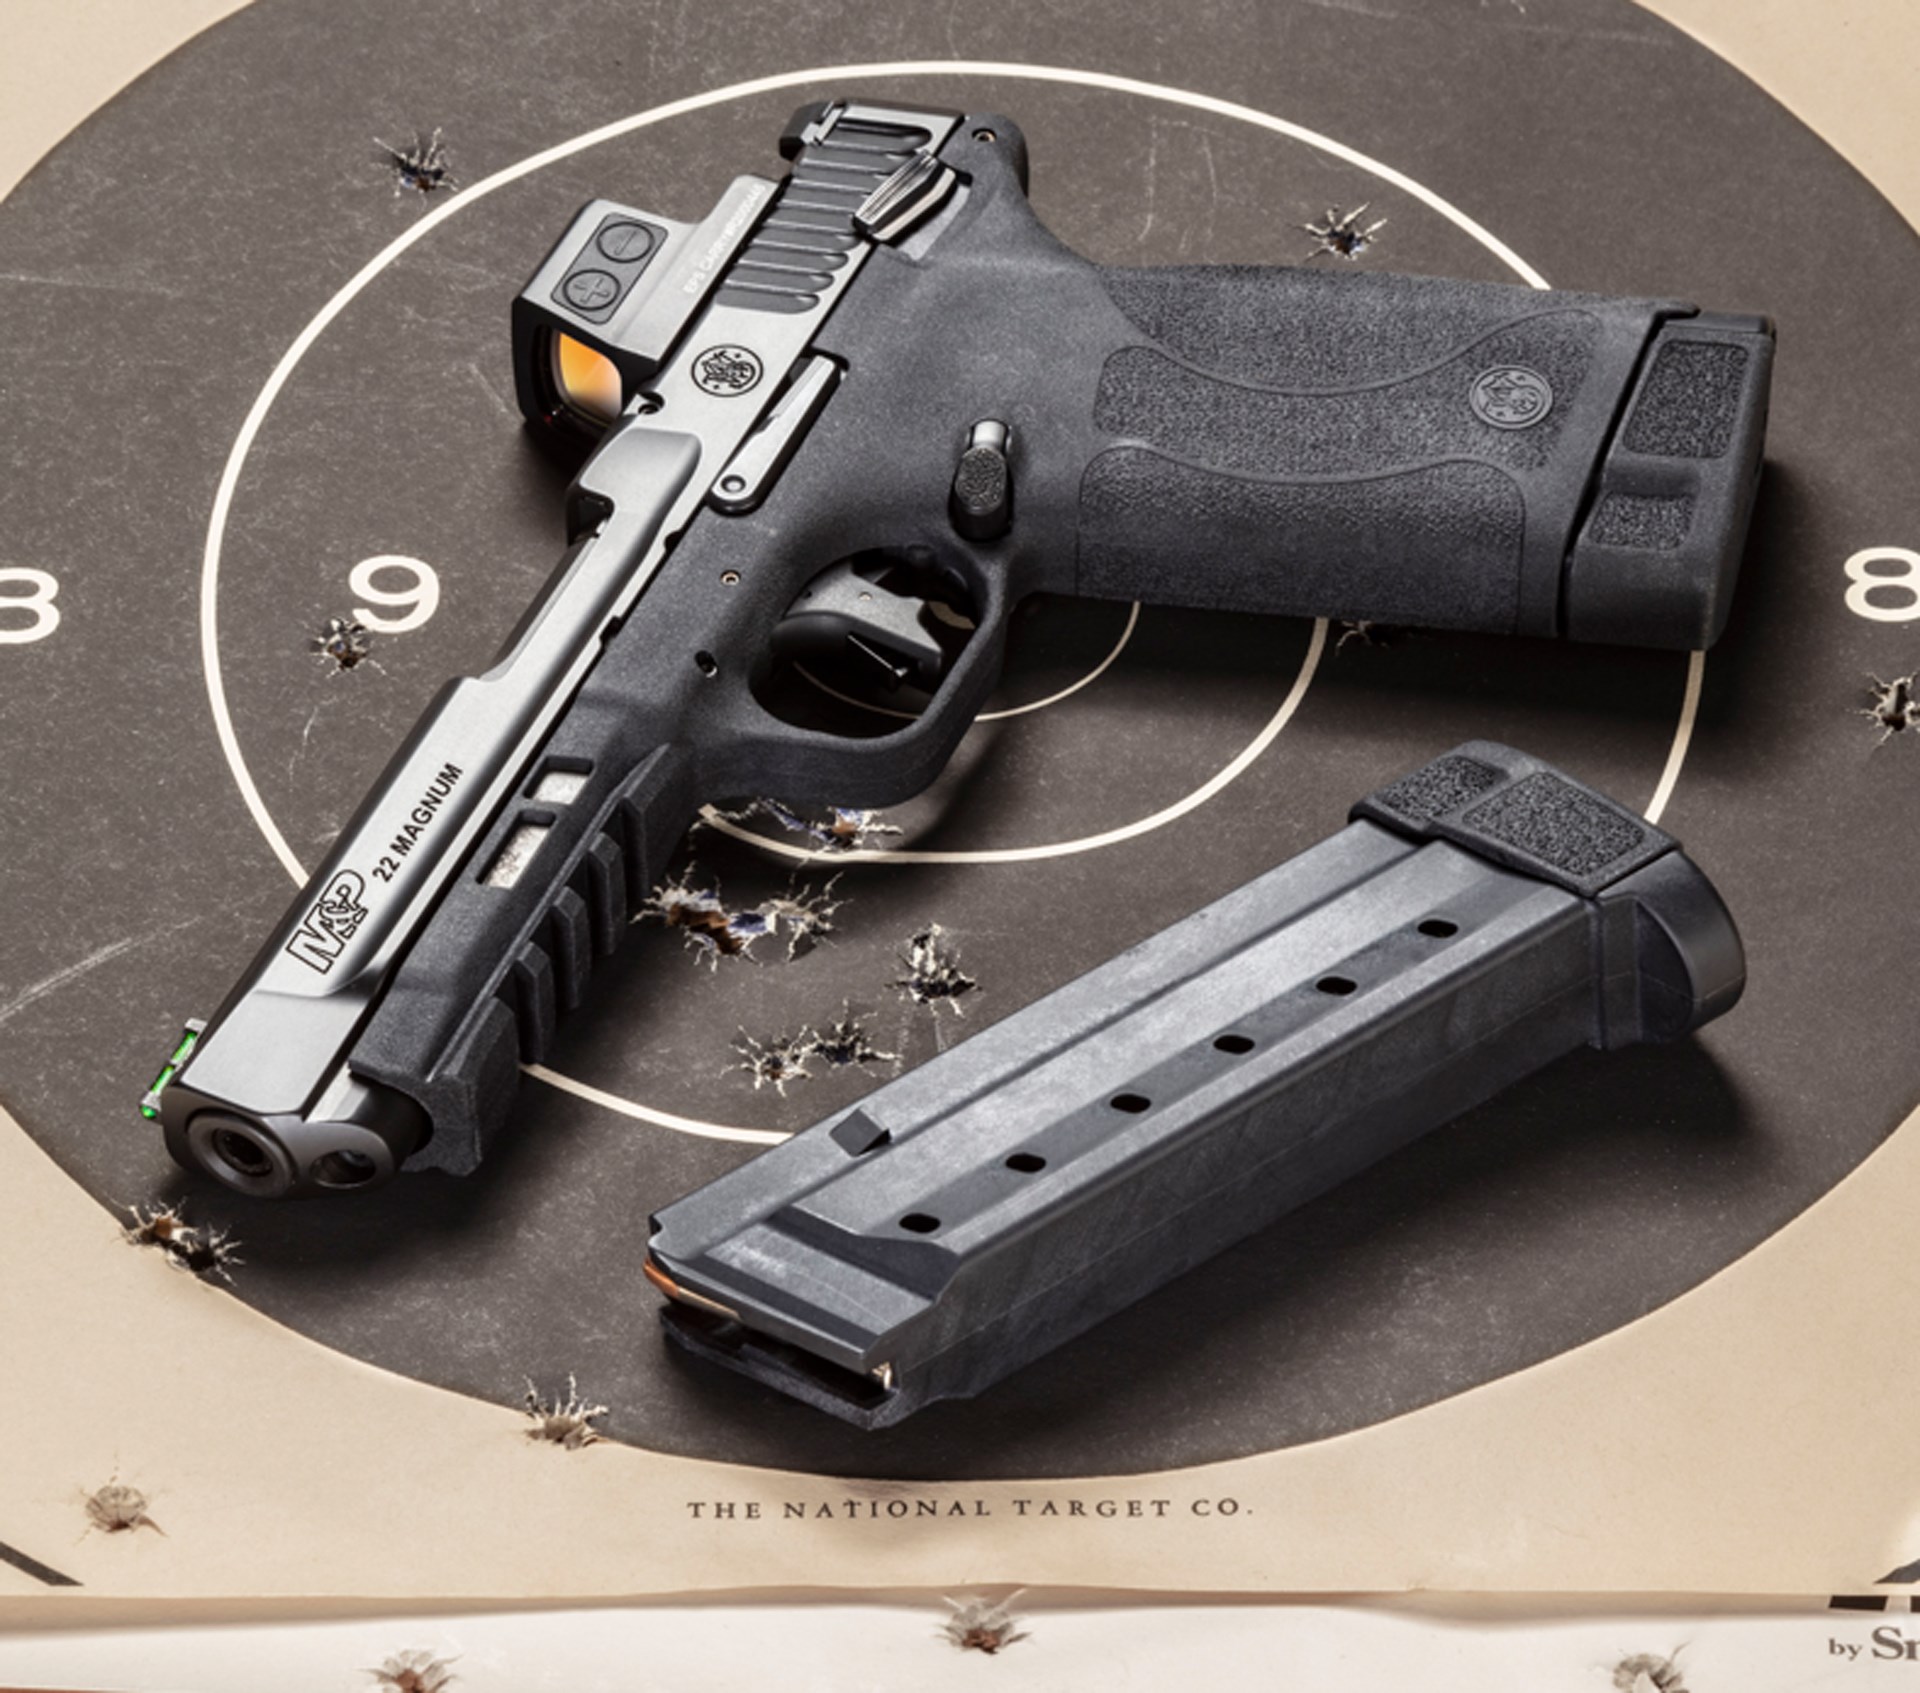 The Smith & Wesson M&P 22 Magnum laying on a shot bullseye target with an empty black magazine next to it.